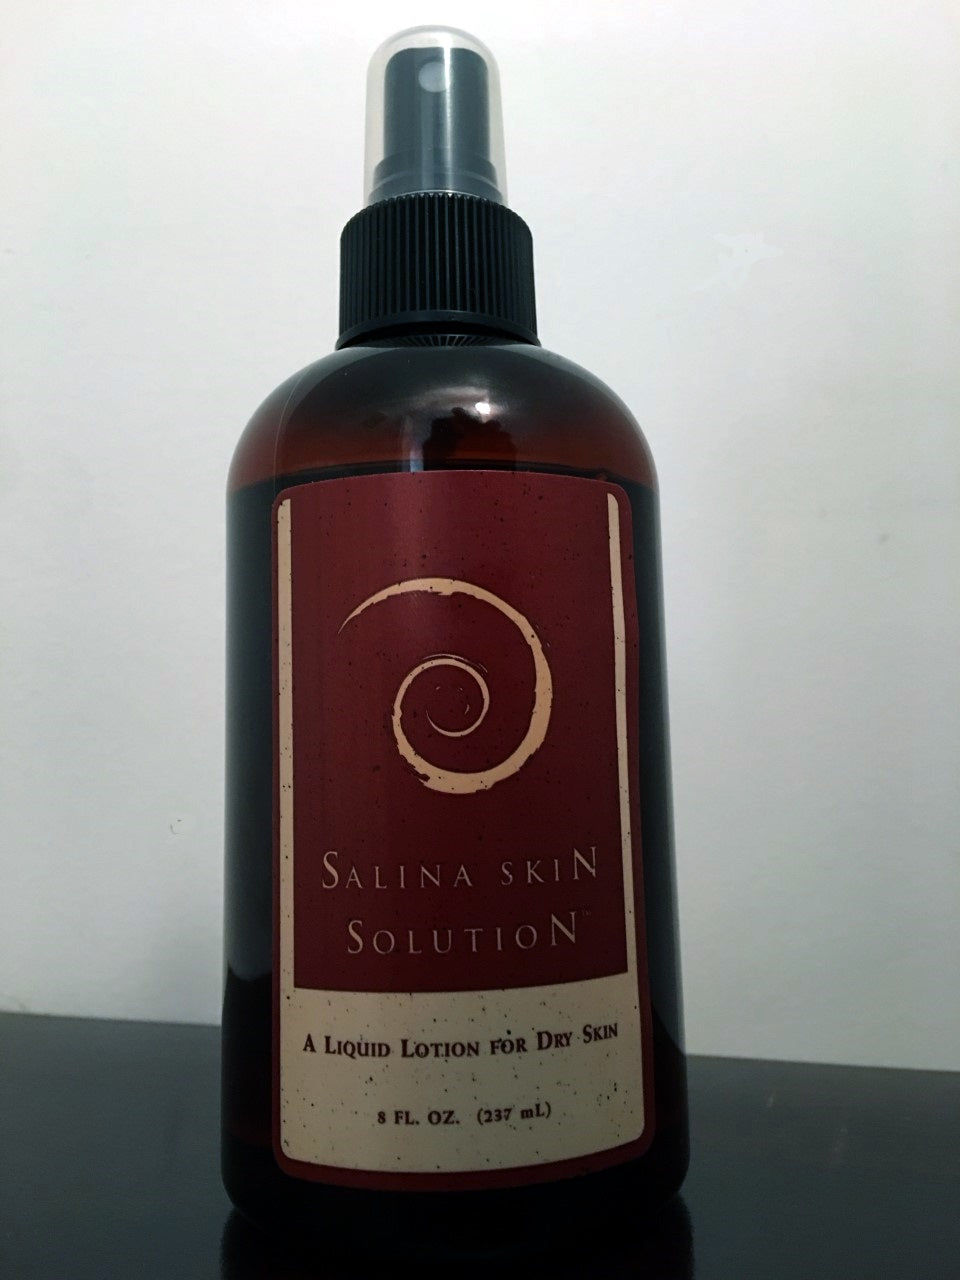 Salina Lotion, from Pure Cell Organics, in Salt Lake City